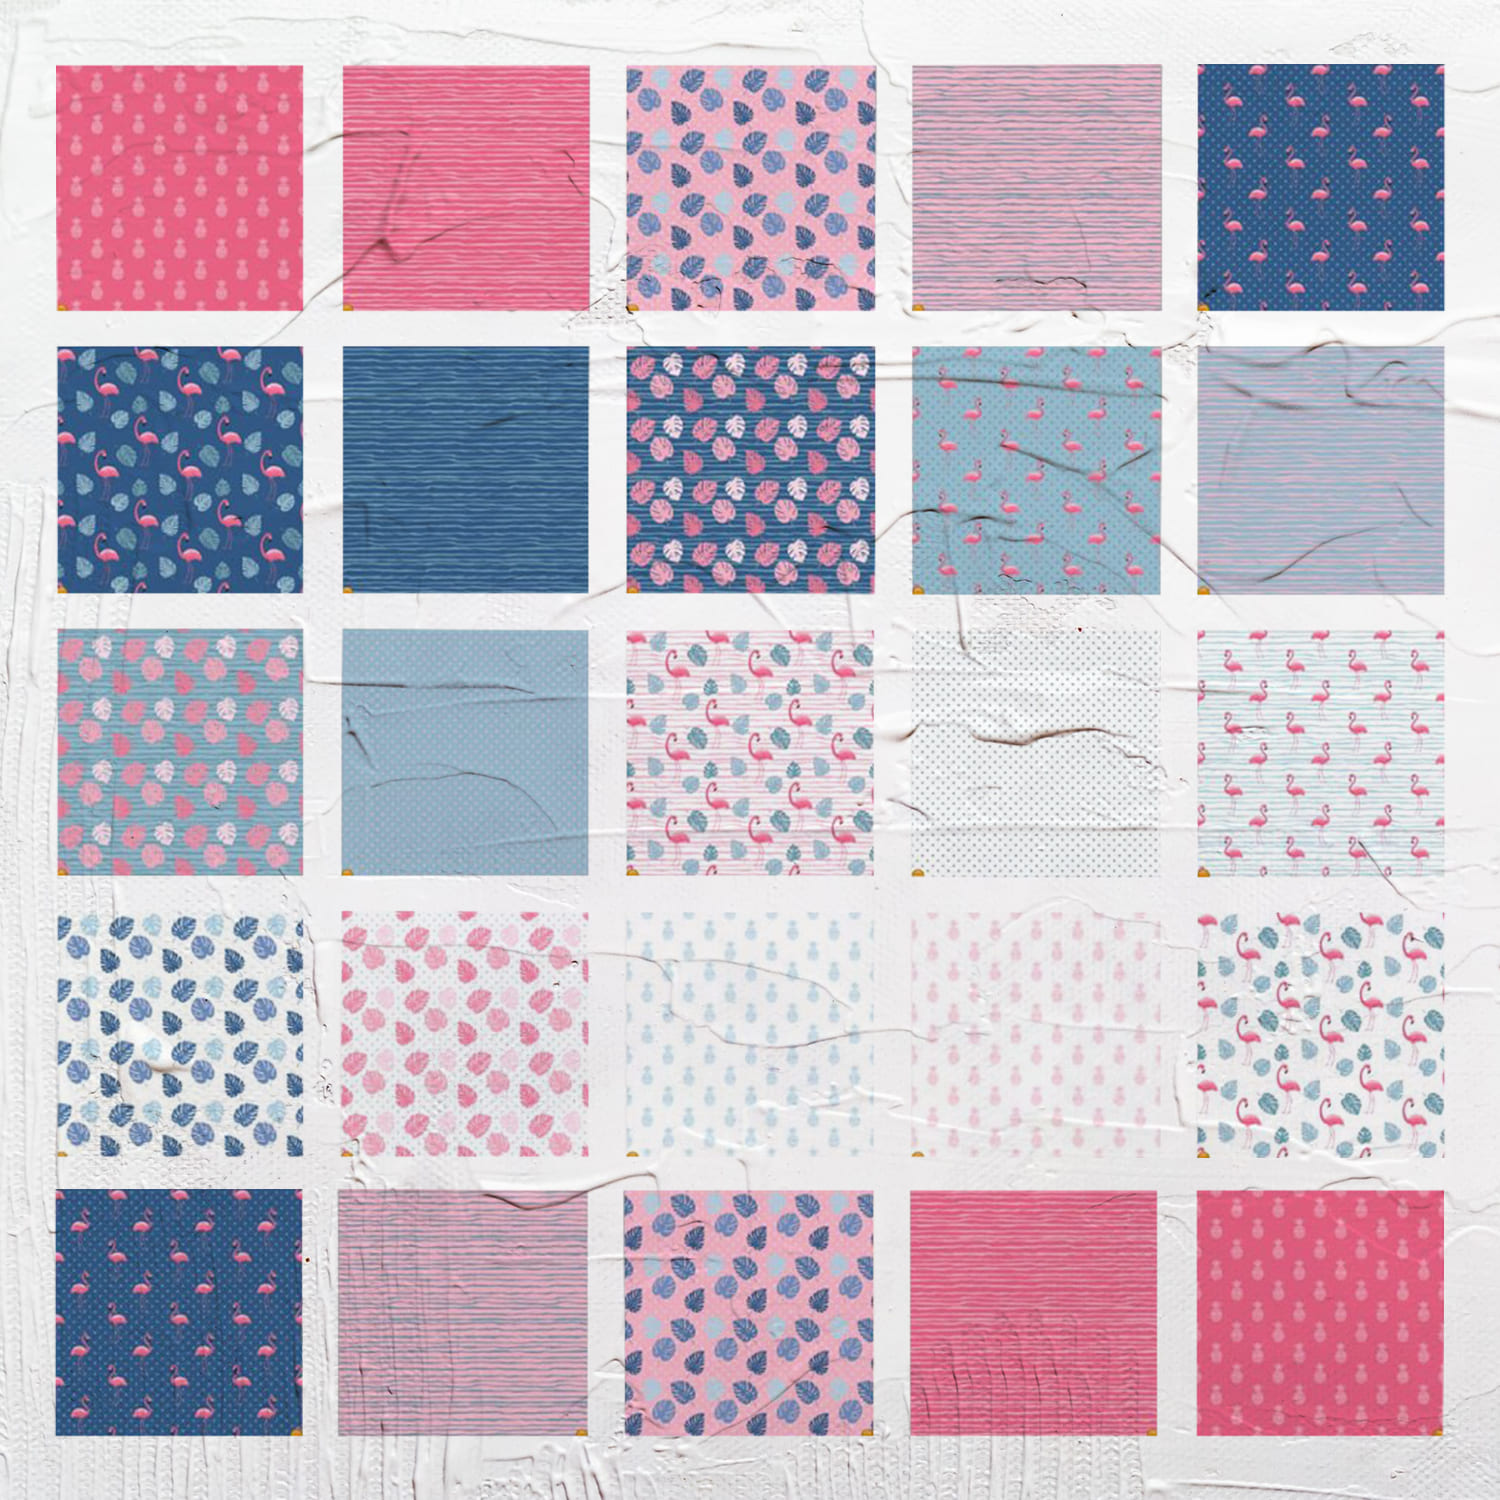 Pink & Blue Flamingo Patterns cover.